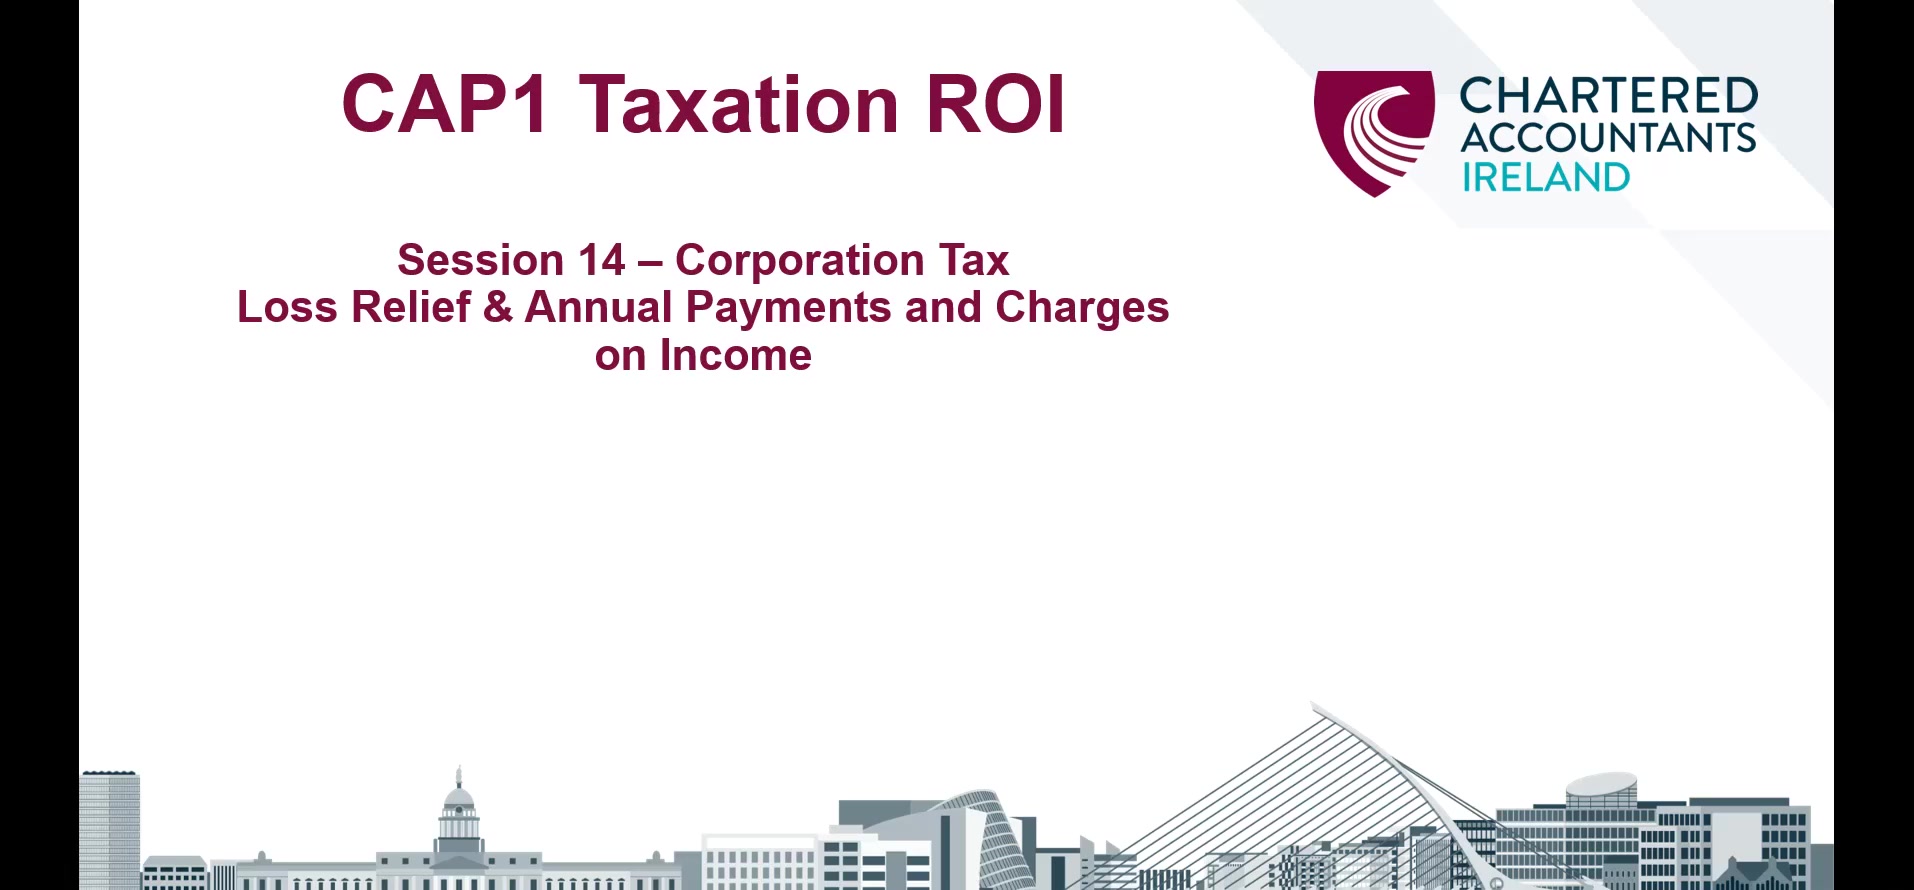 cap1-taxation-roi-2223-14-1-corporation-tax-loss-relief-trading